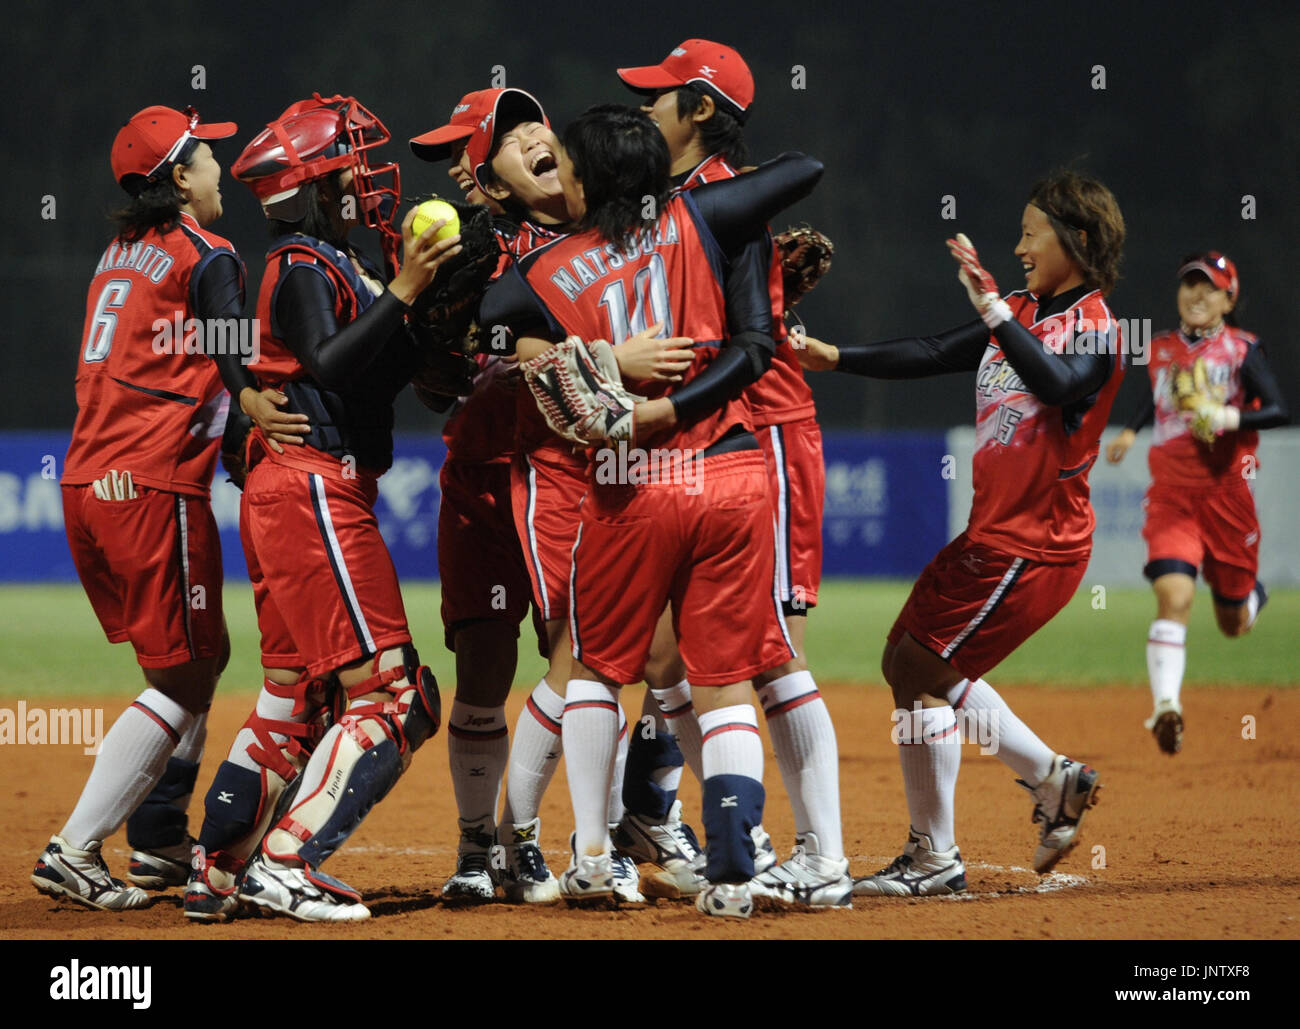 GUANGZHOU, China - Japanese softball players celebrate their 2-0 victory over China on the pitching mound on Nov. 26, 2010, at the Asian Games in Guangzhou, China. Japan won their third consecutive Asian Games softball title. (Kyodo) Stock Photo